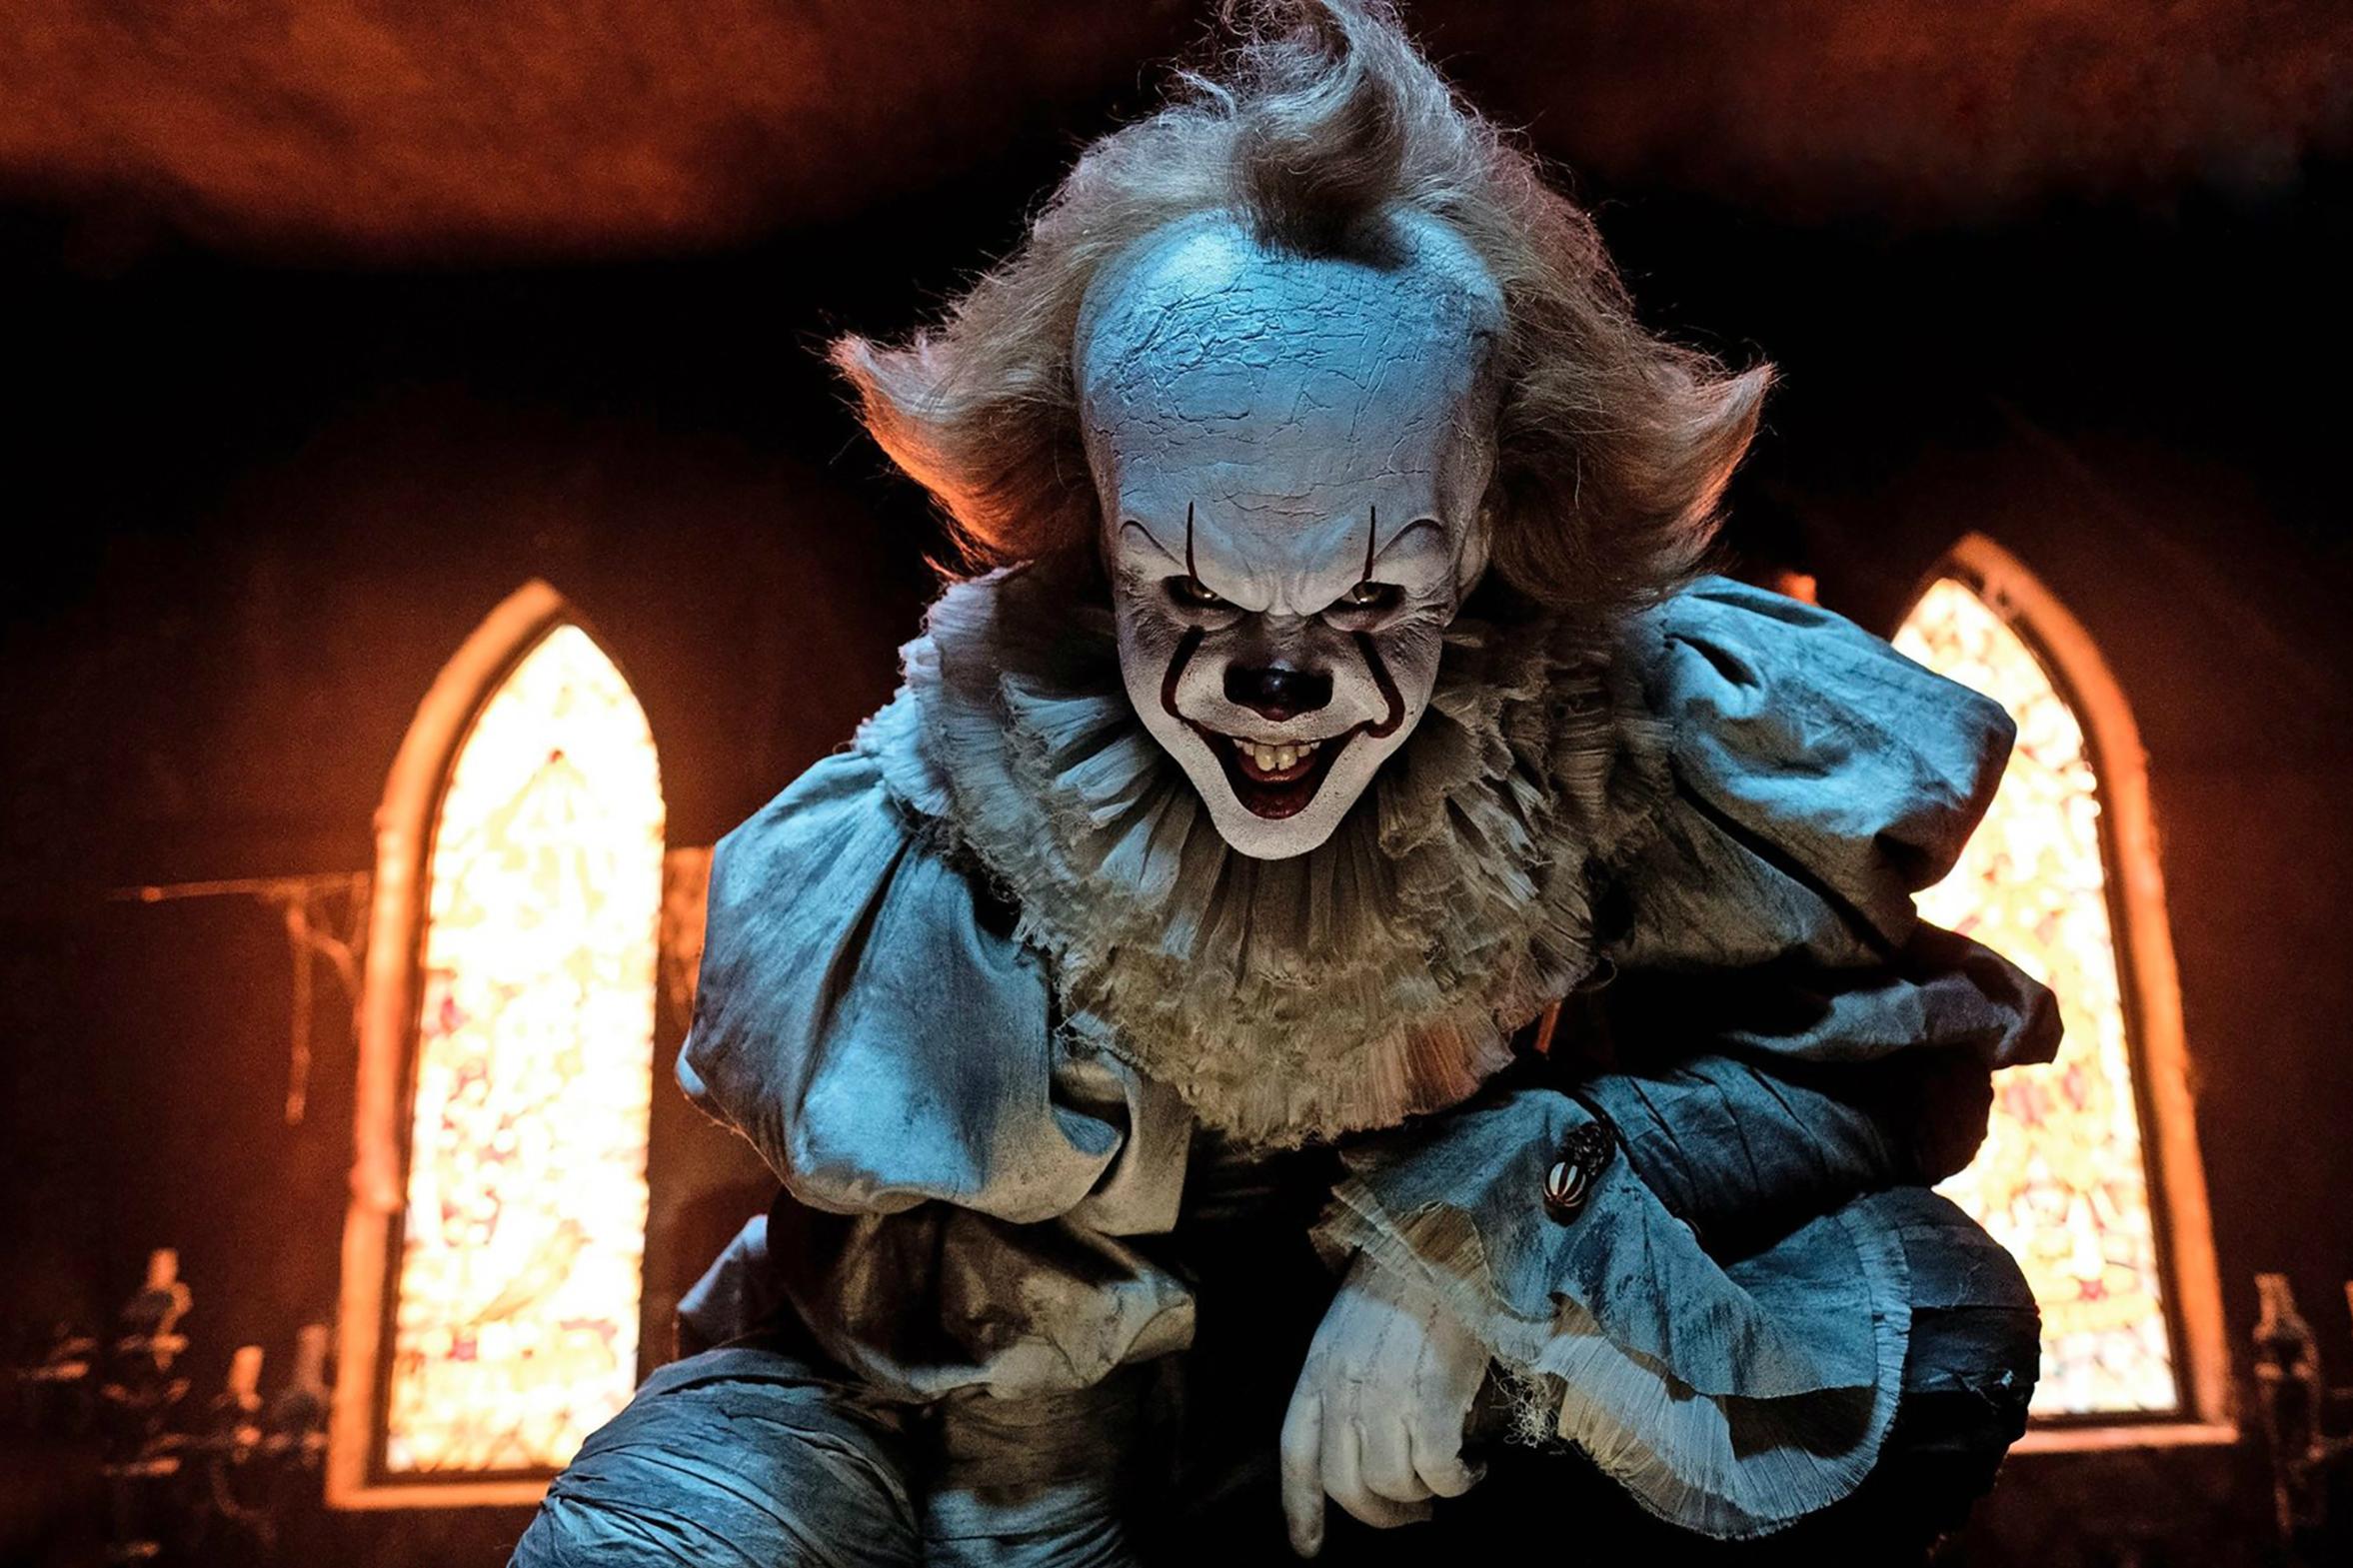 It: Disturbing deleted scene showed Pennywise before he was a clown